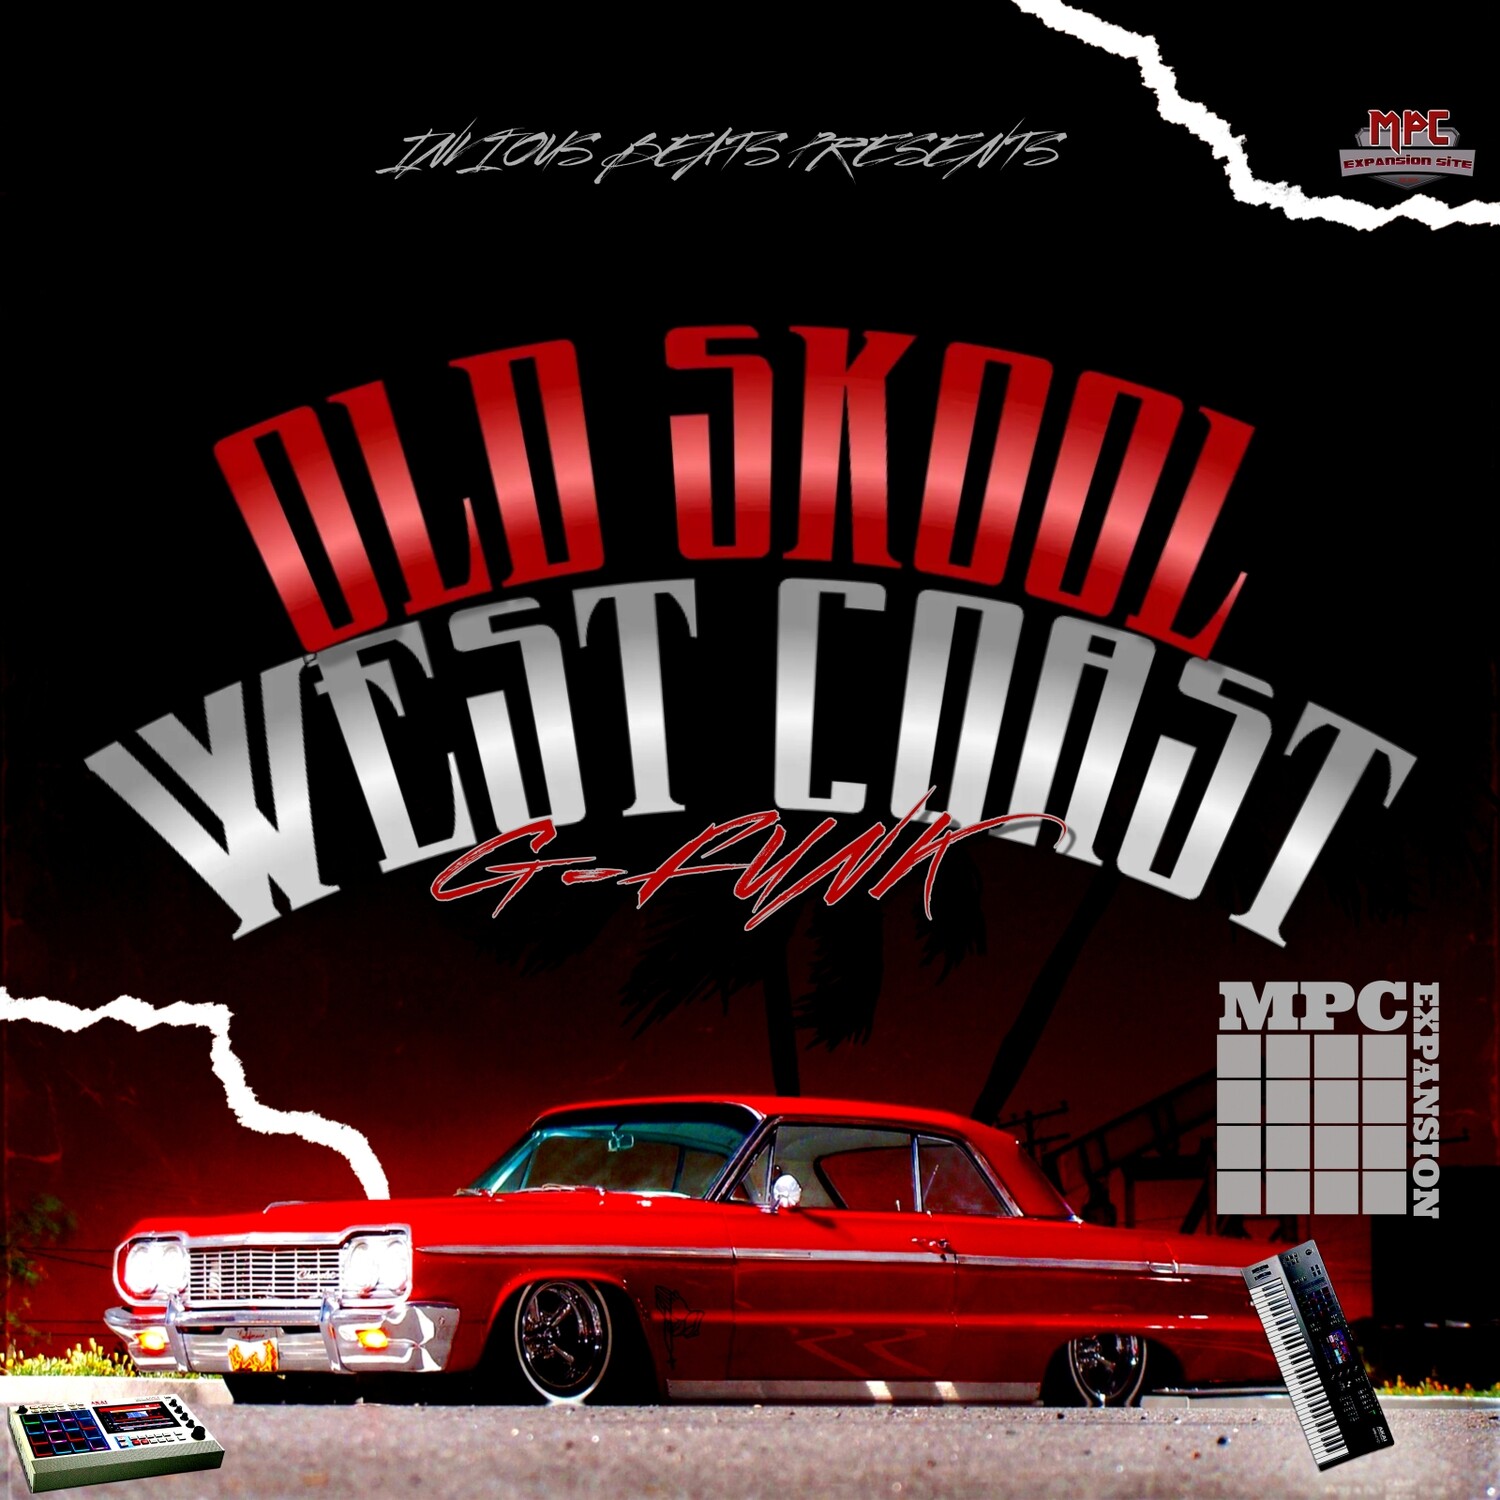 MPC EXPANSION 'OLD SKOOL WEST COAST GFUNK' by INVIOUS